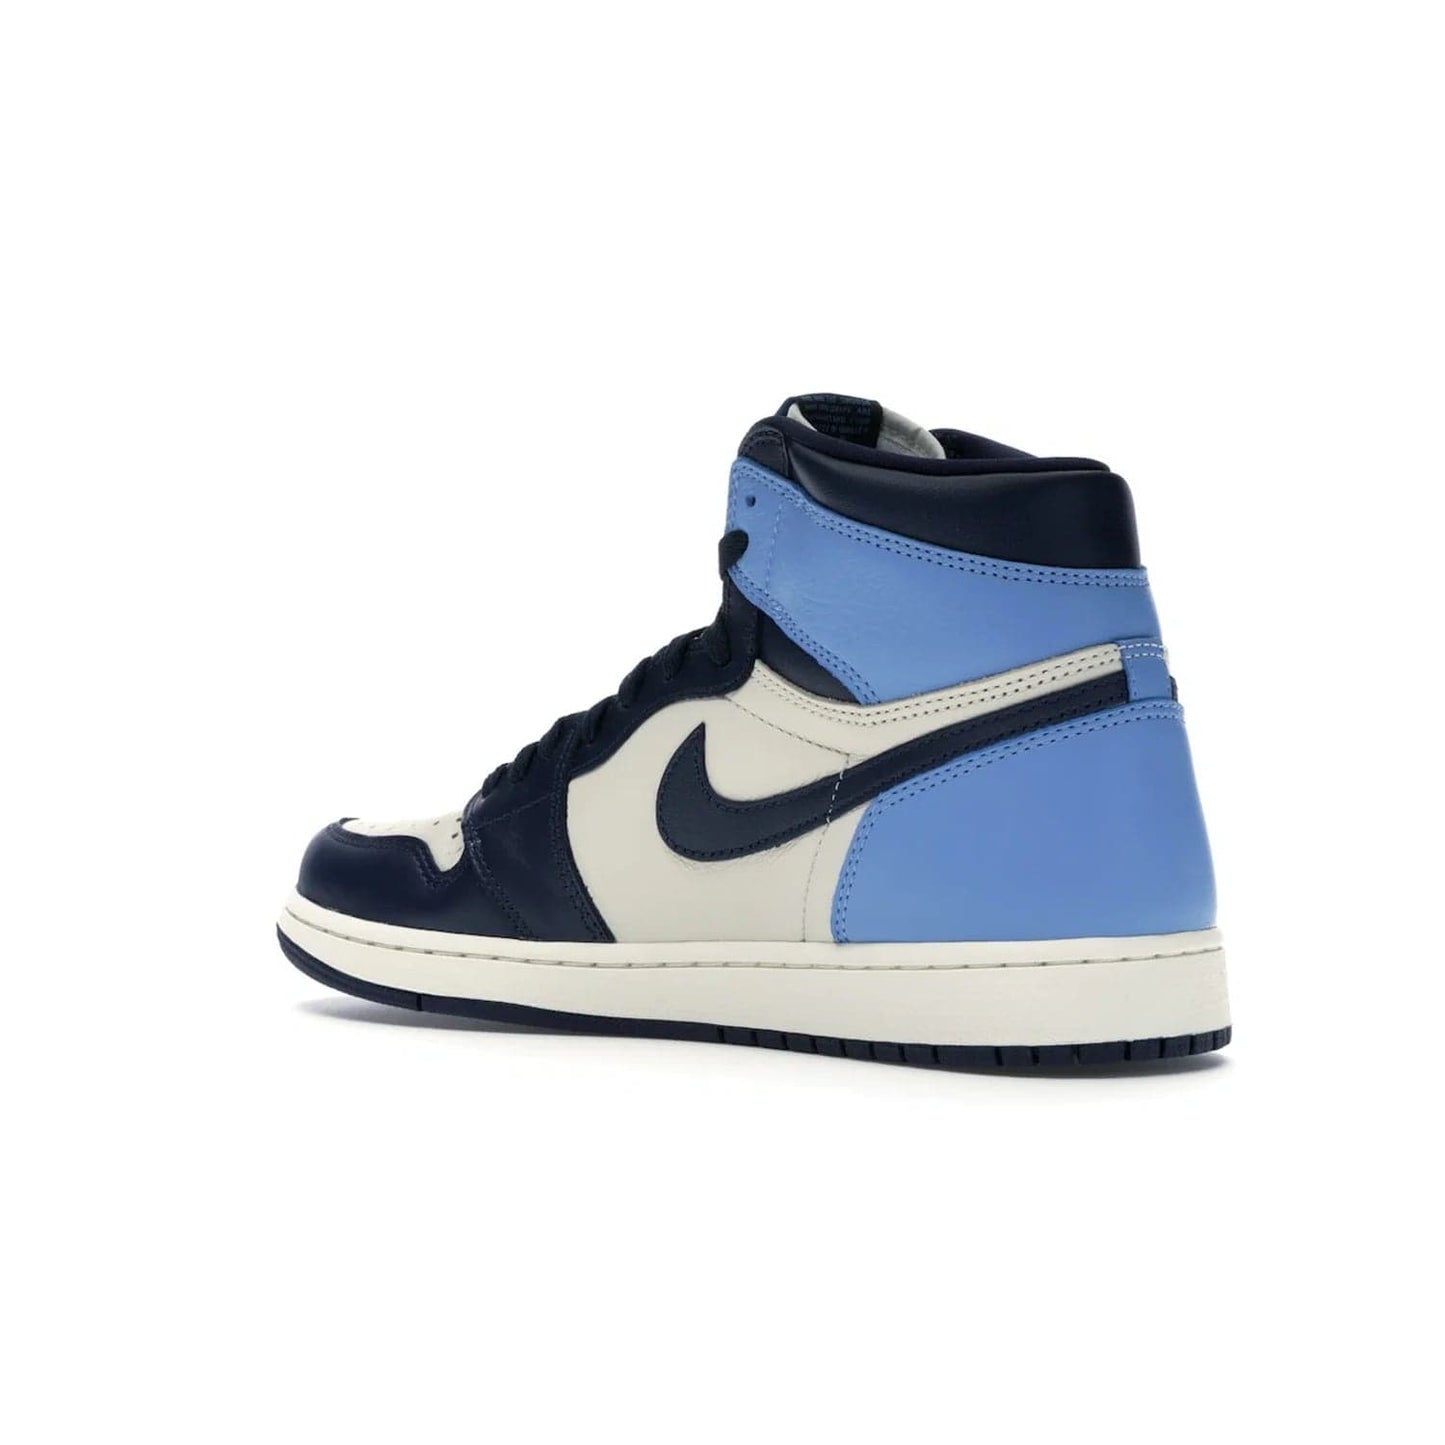 Jordan 1 Retro High Obsidian UNC - Image 23 - Only at www.BallersClubKickz.com - Bring a timeless classic to your wardrobe with the Air Jordan 1 Retro High "Obsidian/University Blue”. A full leather upper combines Obsidian and University Blue detailing for a retro Jordan style. Stitched Jumpman logo pays tribute to UNC. Experience classic style with a timeless sneaker.